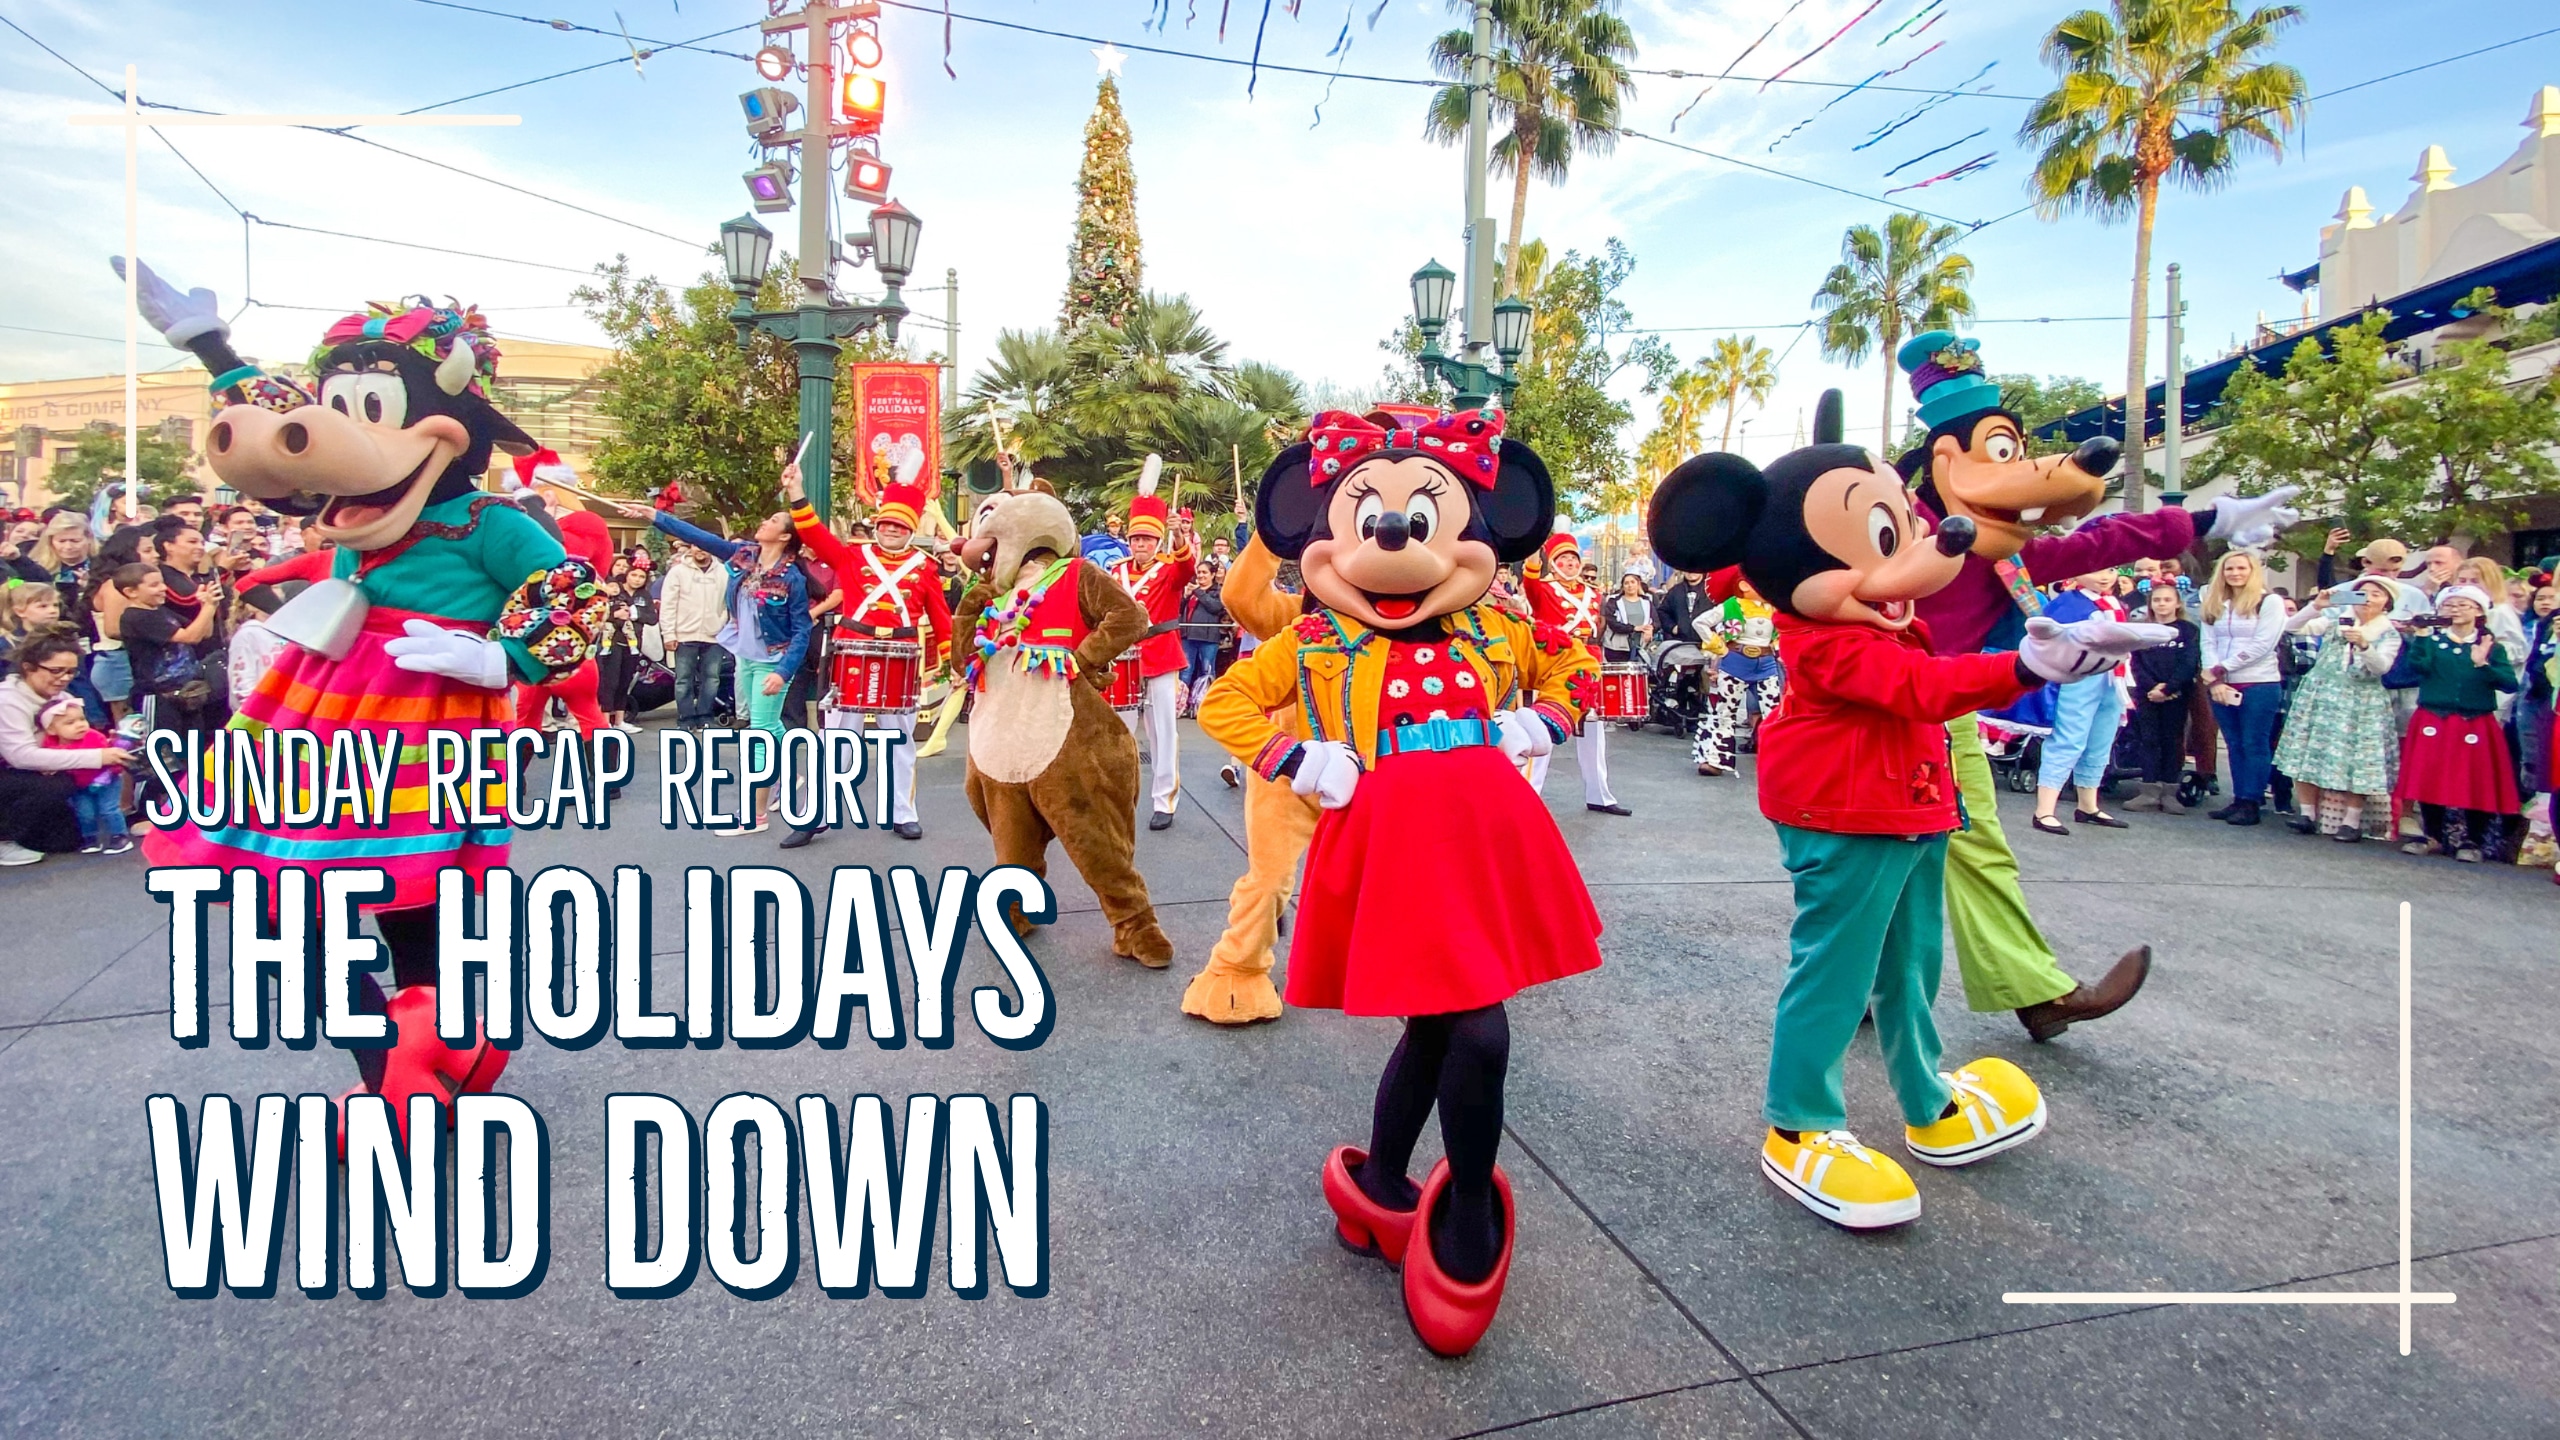 Sunday Recap Report – The Holidays Wind Down